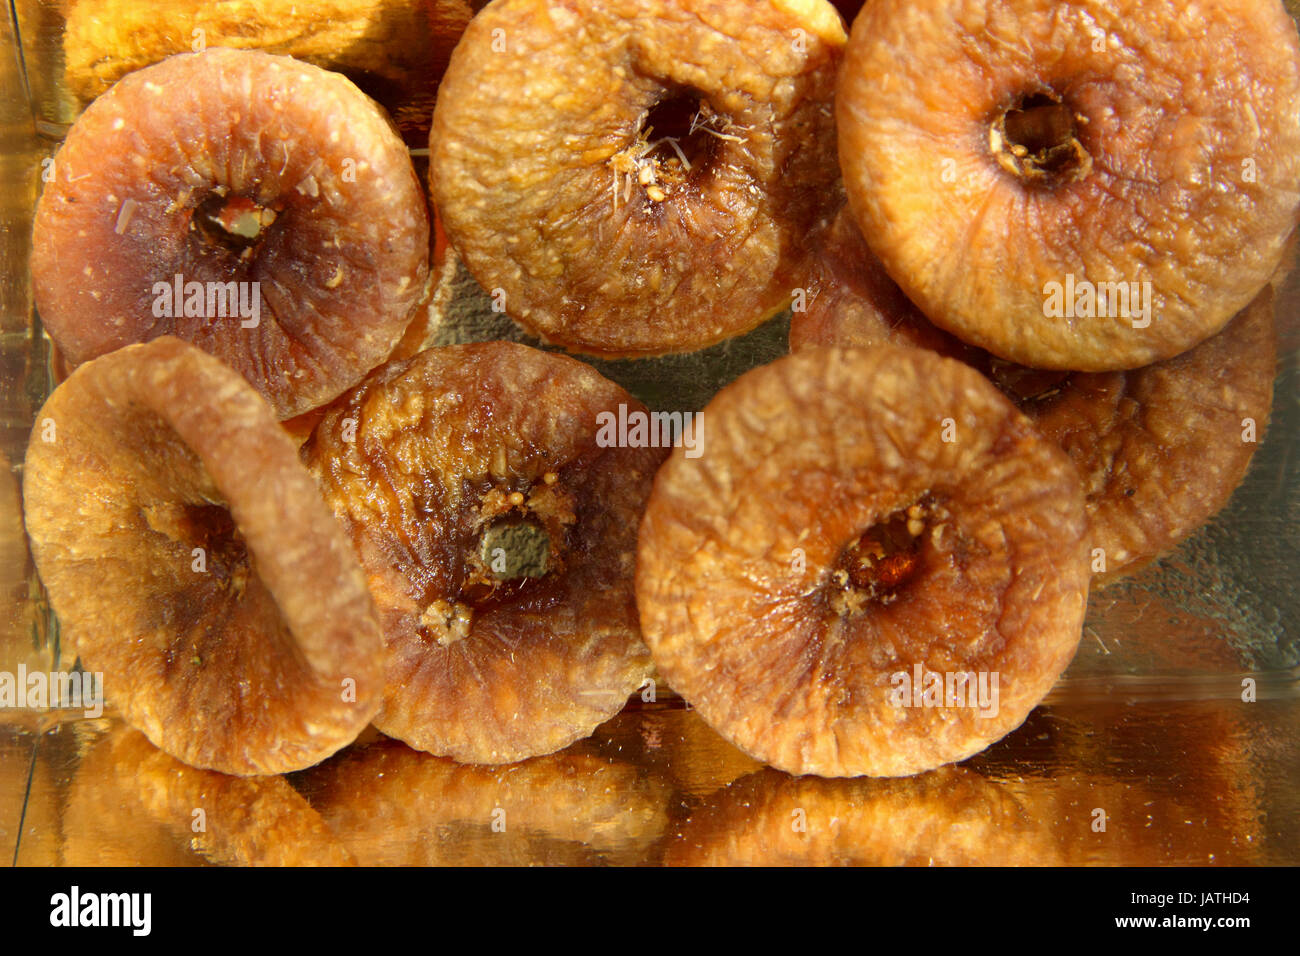 tung Korrespondance Lada Dried figs rich in fiber and minerals like calcium, iron, magnesium,  manganese and potassium Stock Photo - Alamy